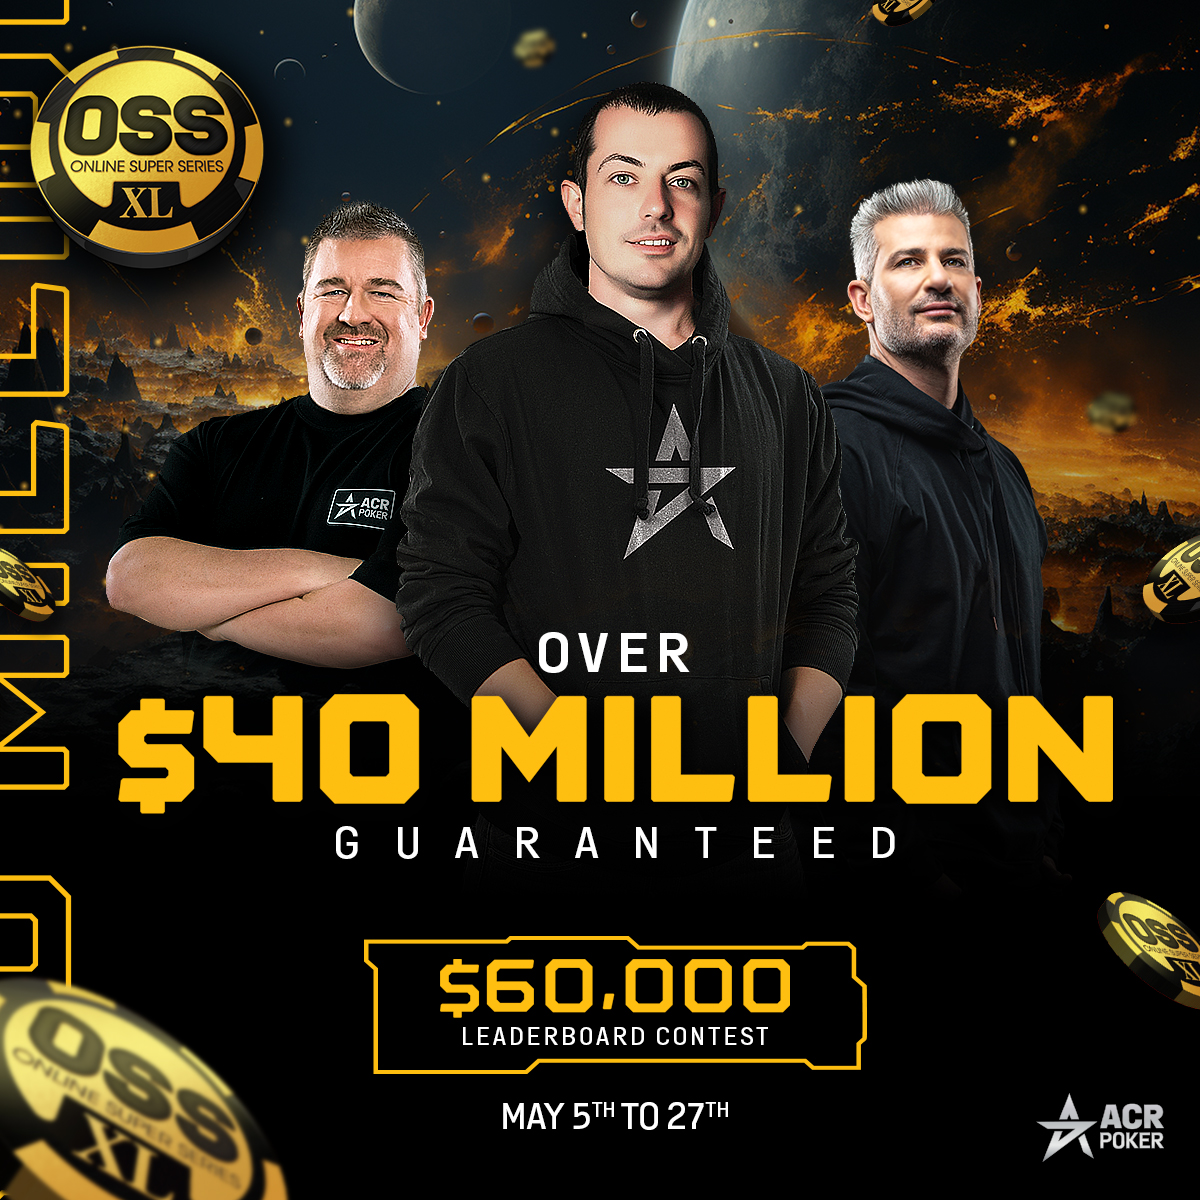 Our #OSS XL starts this Sunday and runs through May 27th. 🔥 This Extra Large version of our flagship series has over $40 Million in guaranteed prize pools and there are tons of satellites to qualify for cheap.